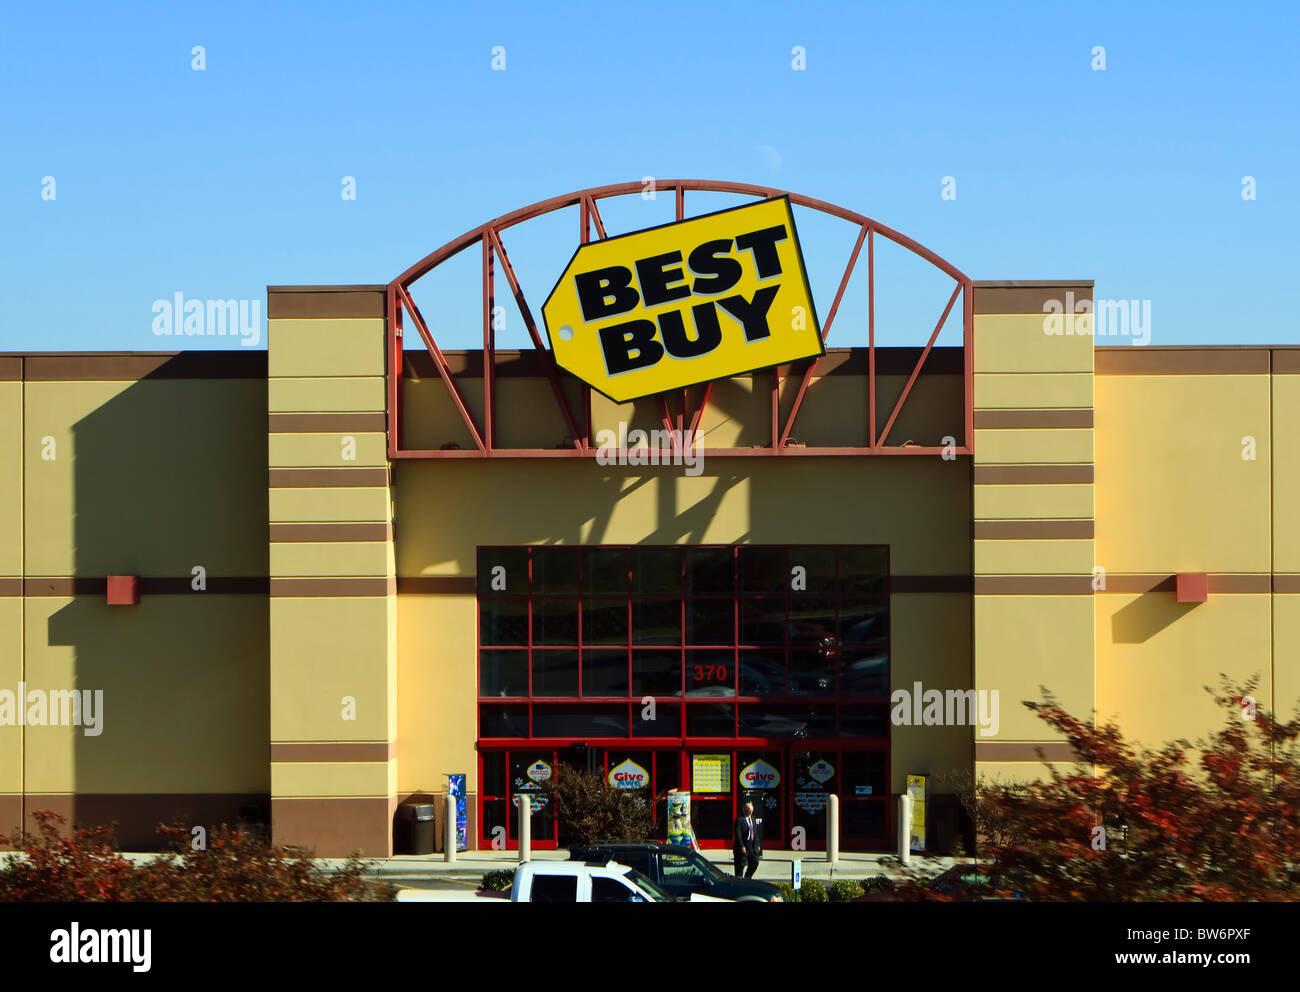 The front entrance and logo sign on a Best Buy retail electronics store on a clear Fall day. Stock Photo